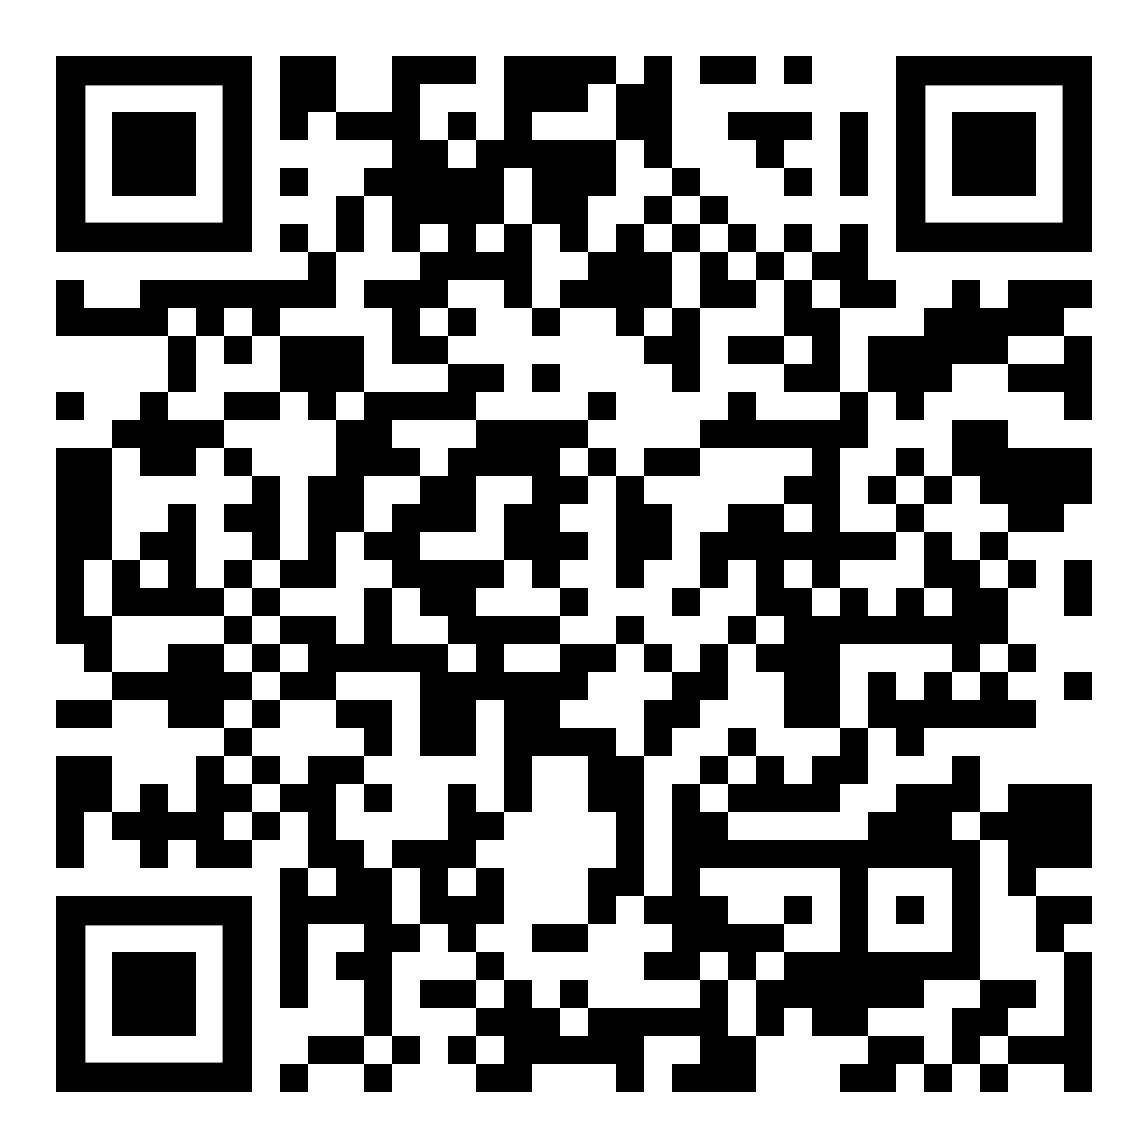 QR-Code for Baby-Safe Home AR on Google Play